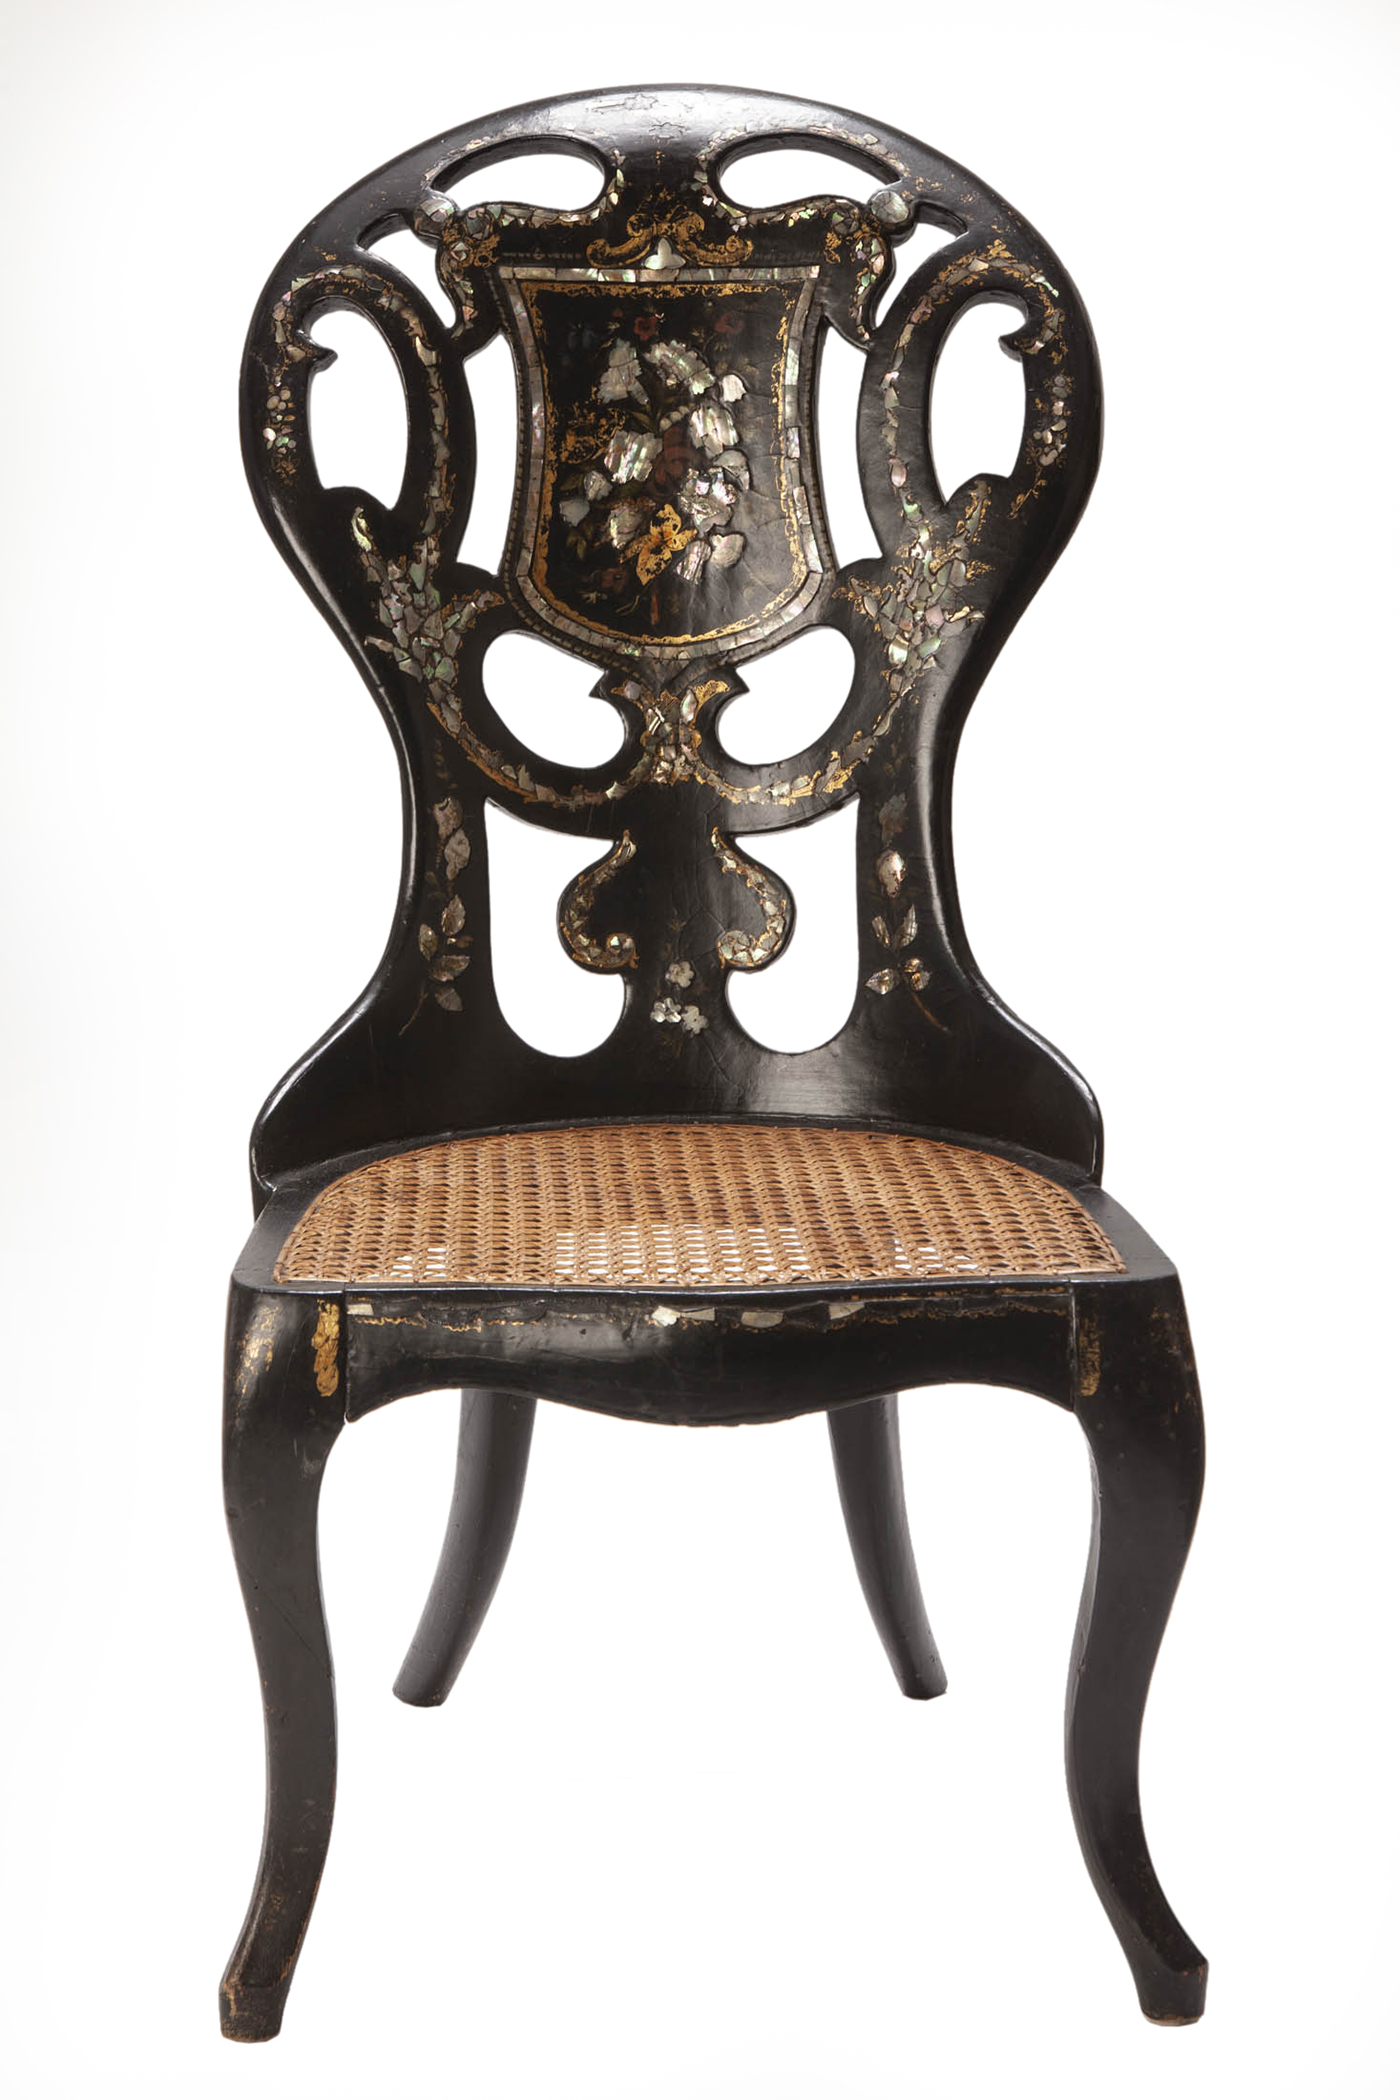 Ebony Cane Chair /Mother of Pearl Inlay~P77600480